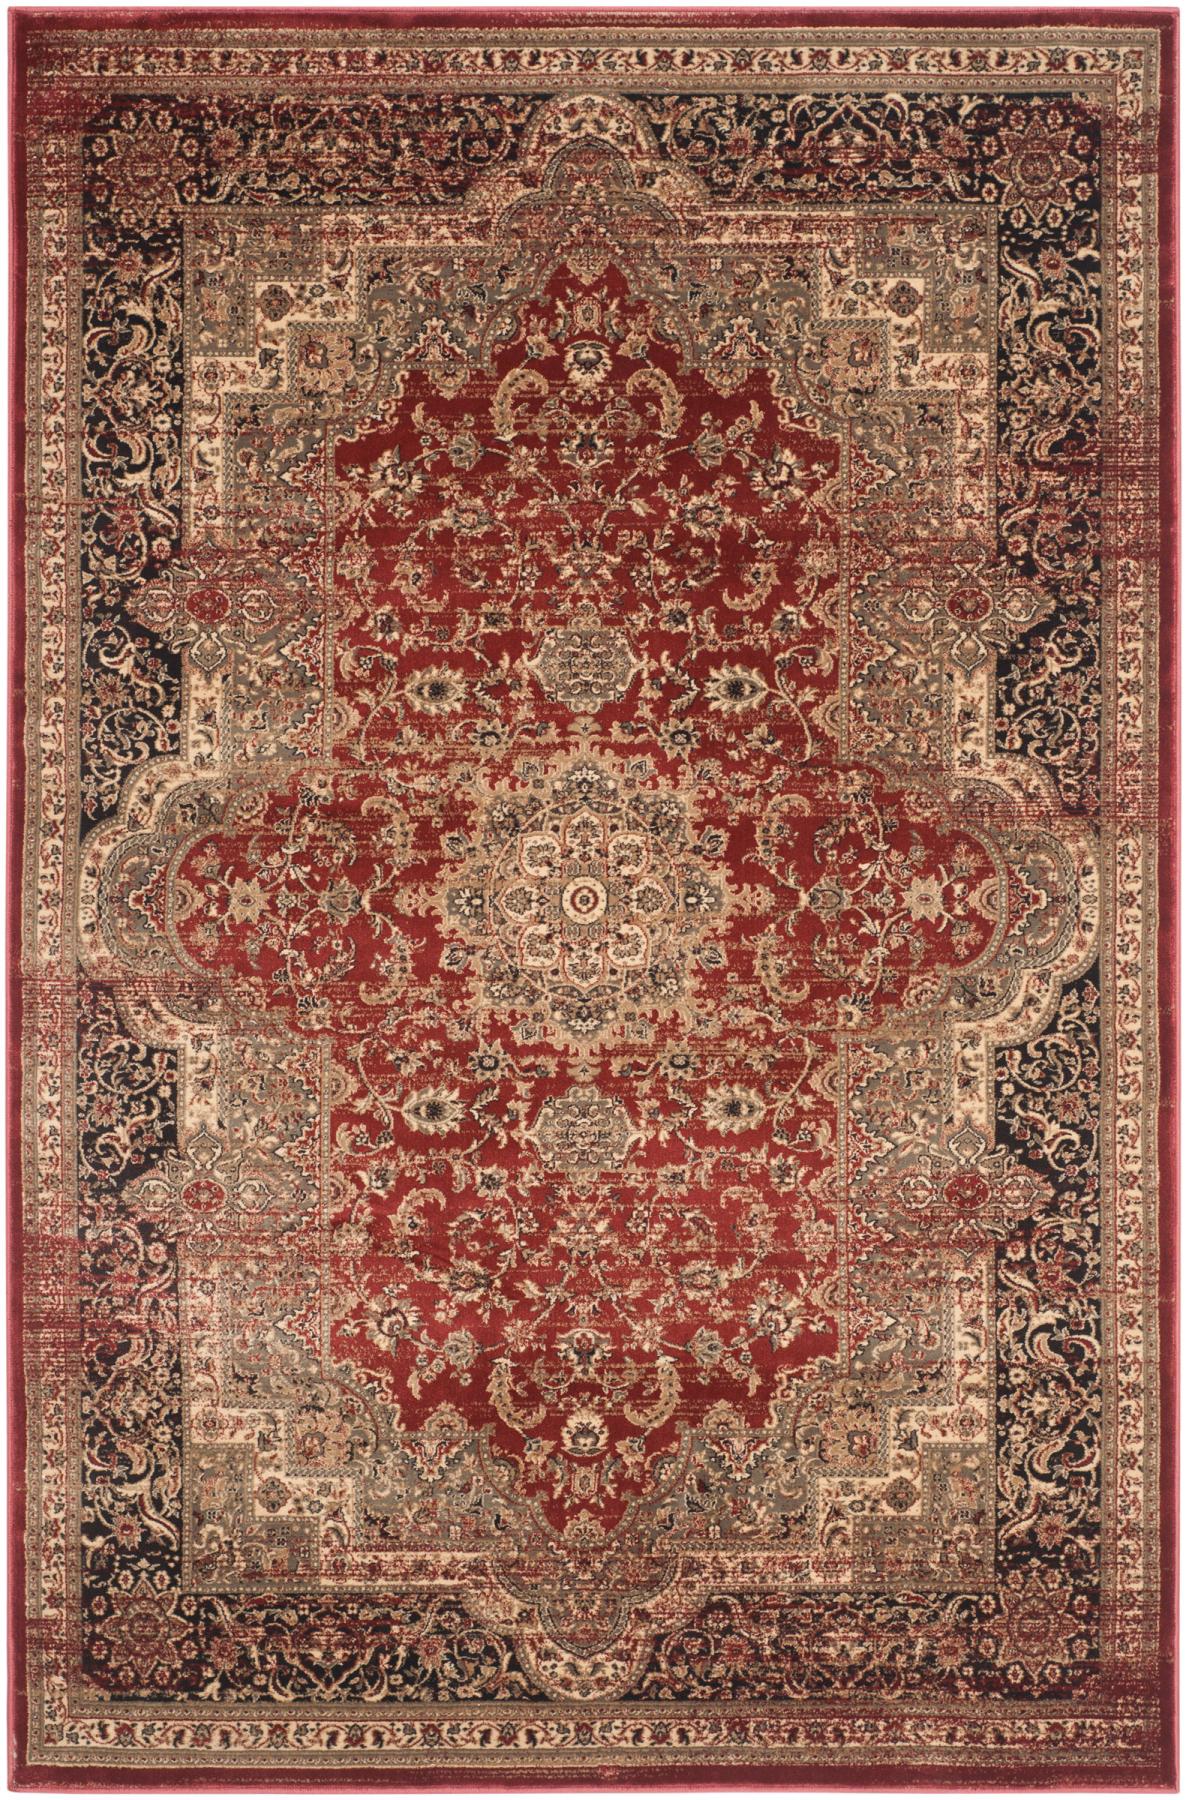 Discover old rugs and find vintage rugs